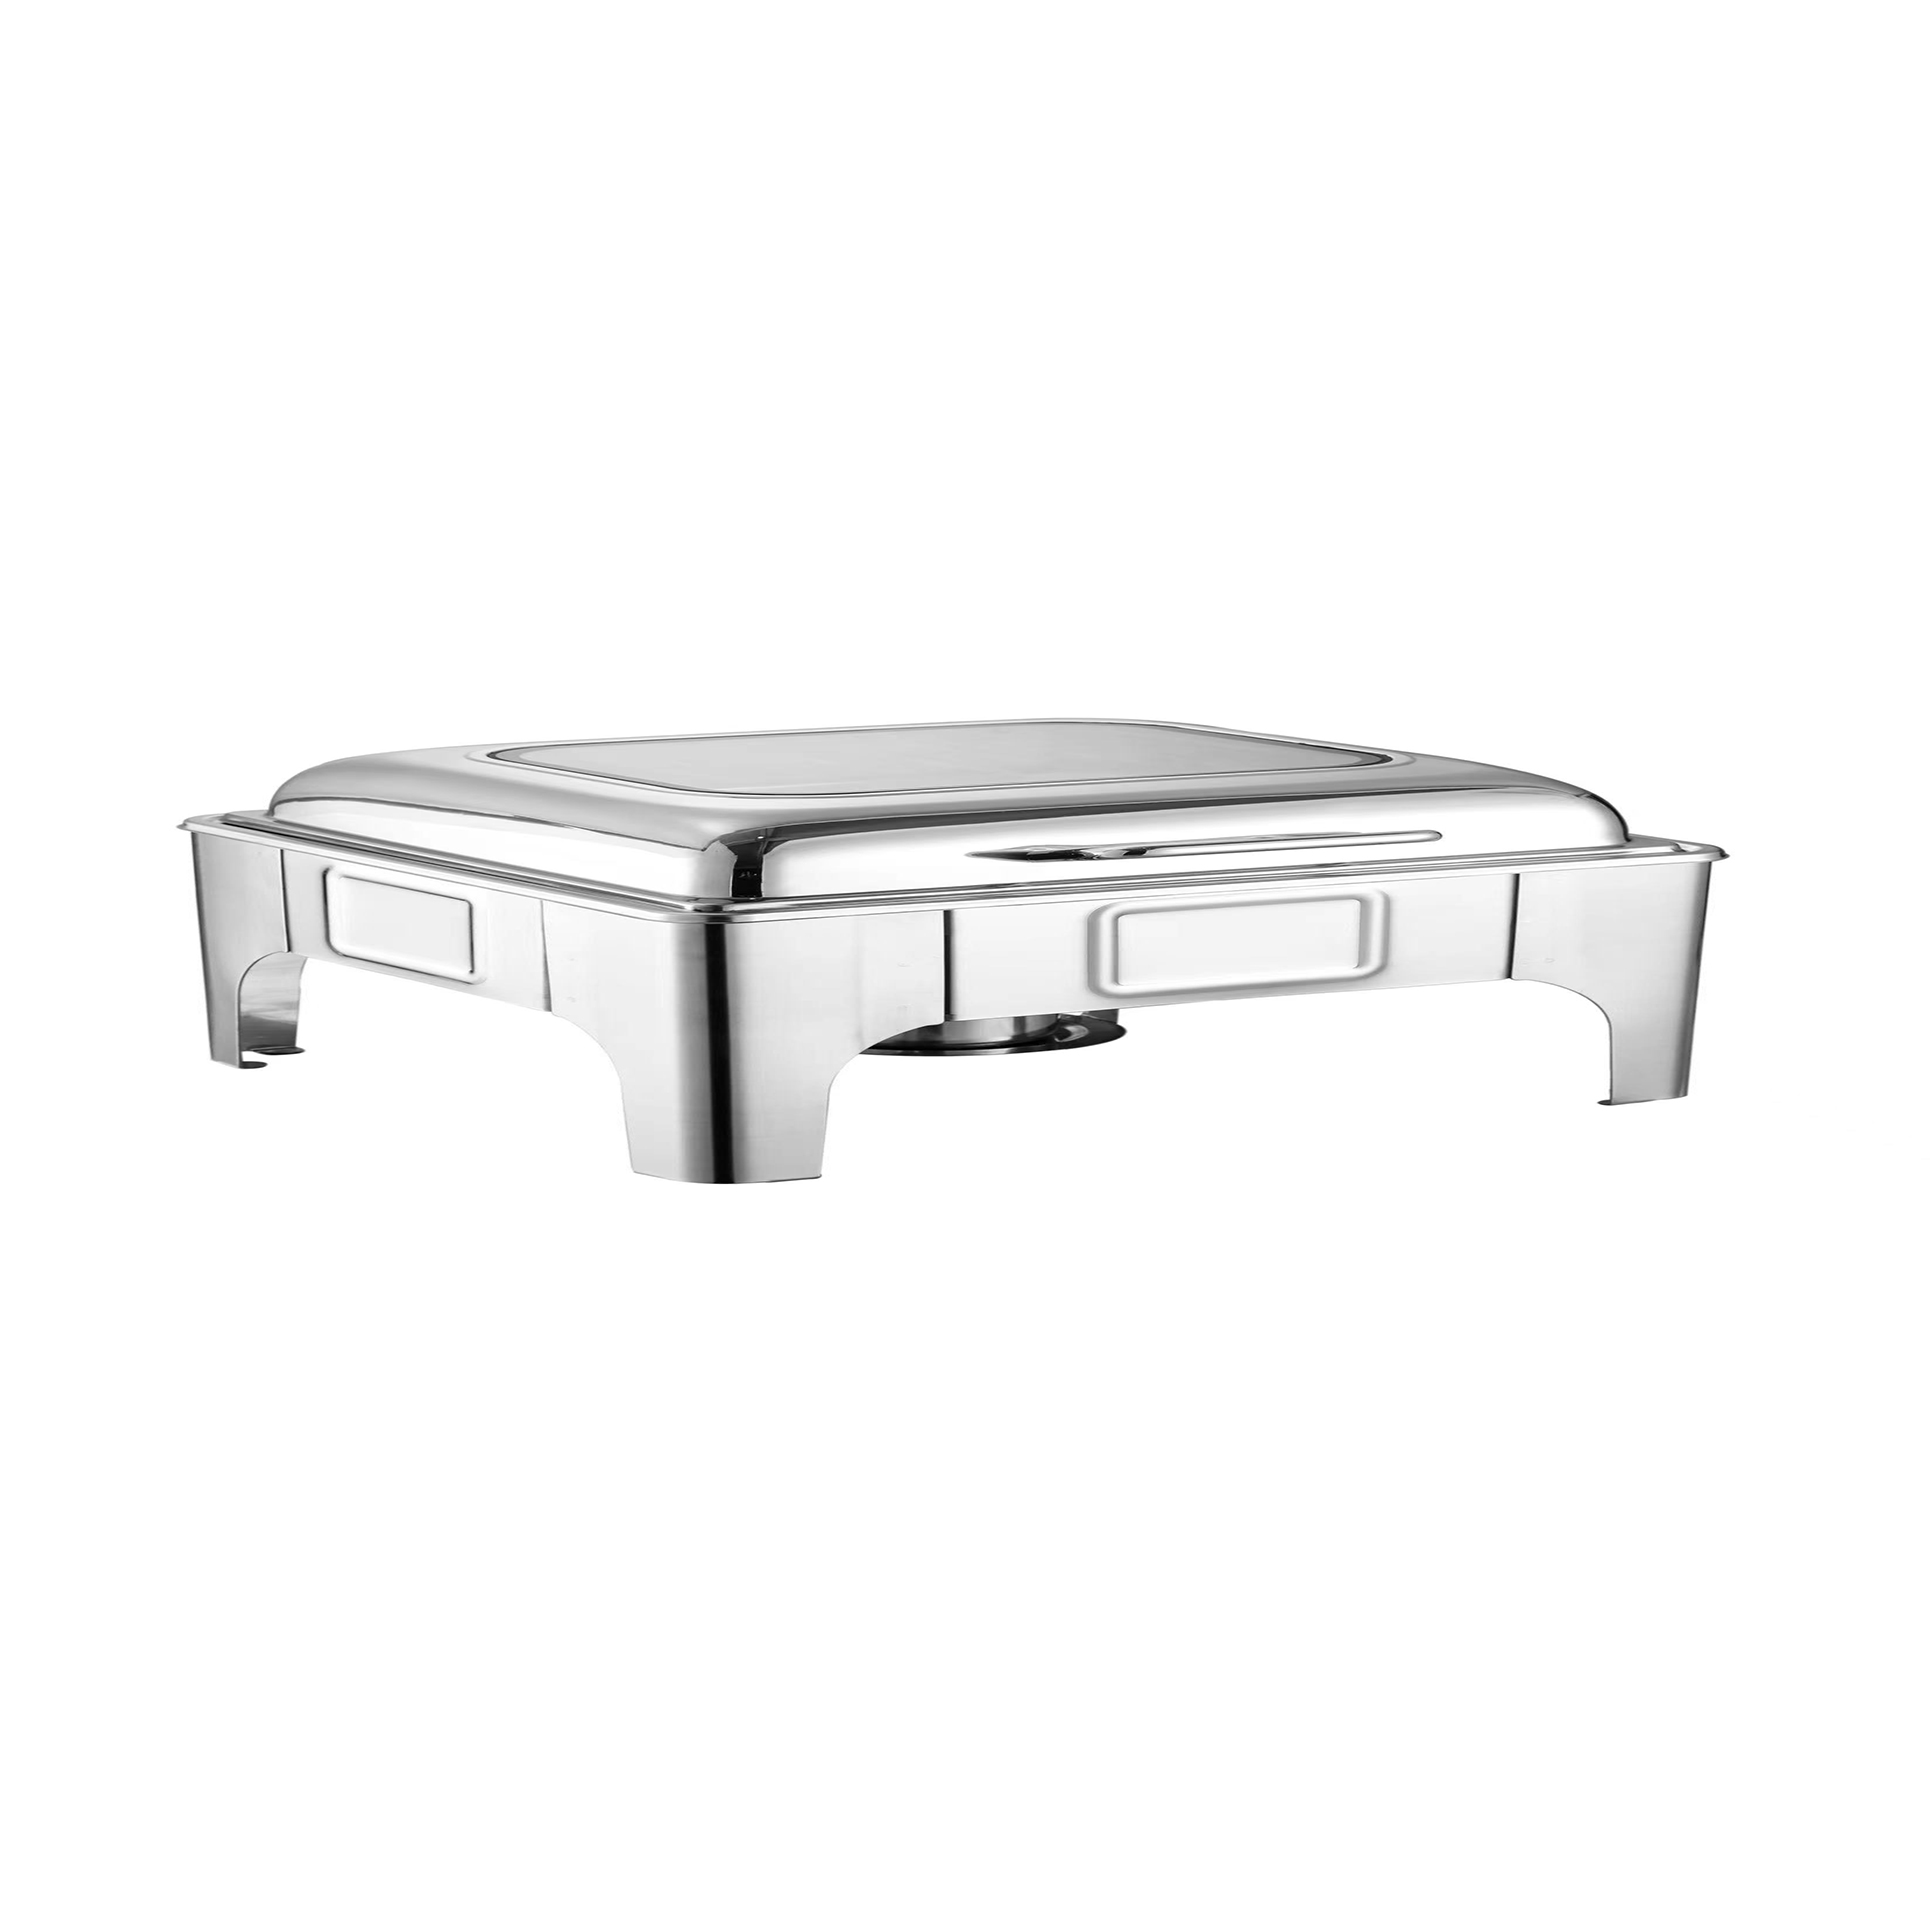 South Base Simple Chafer/Chafing Dishes 322H - South Base